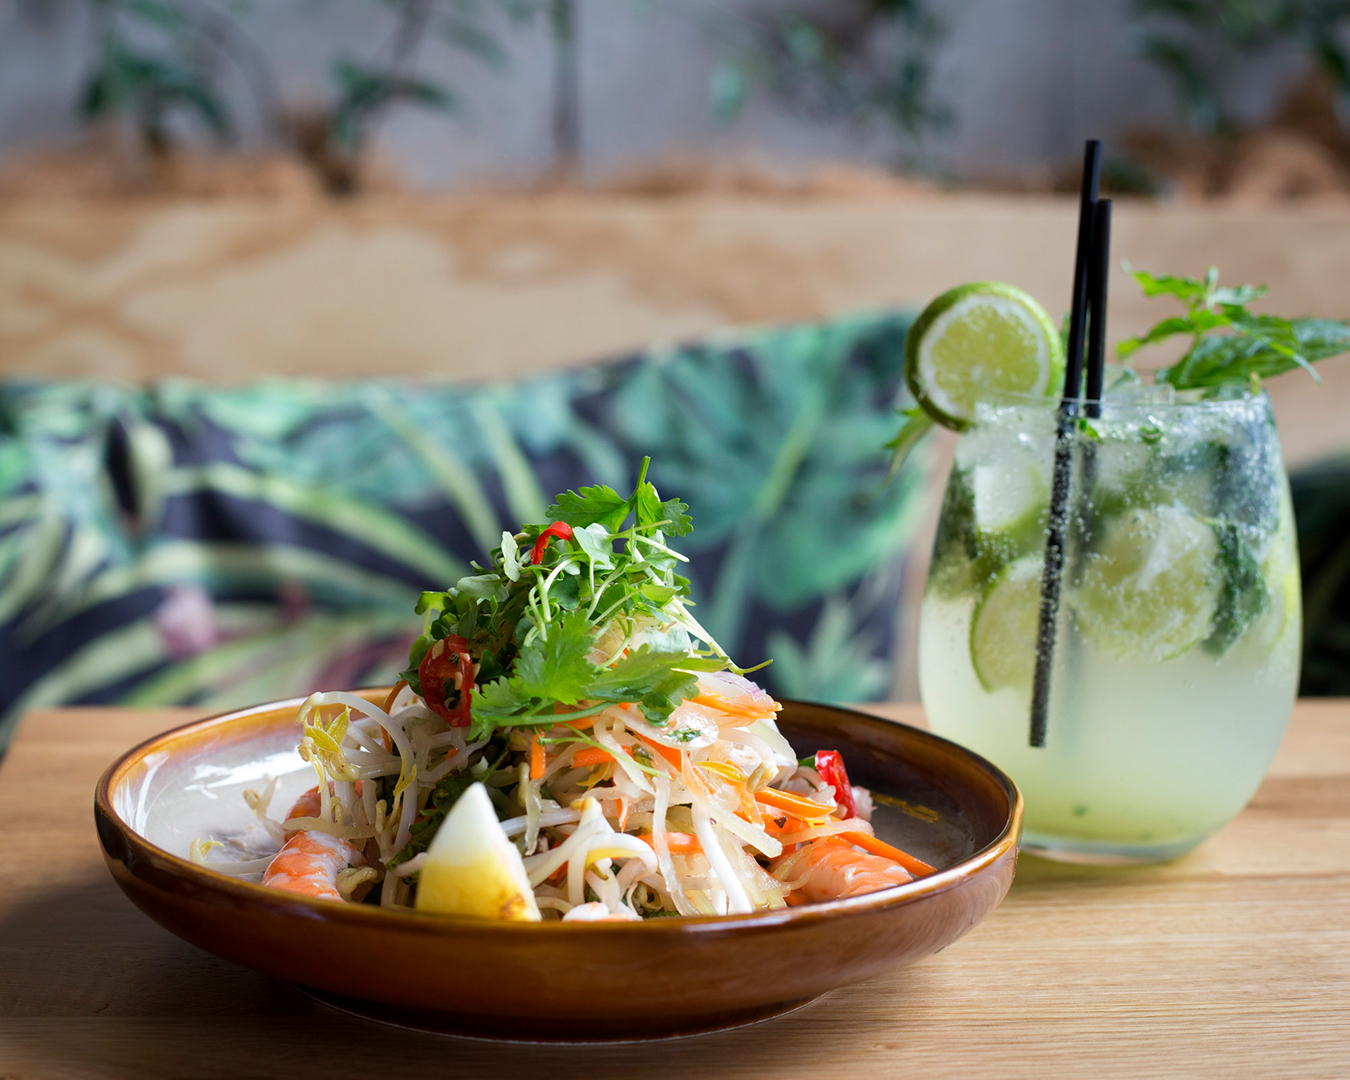 A stunning prawn noodle salad with a cucumber drink from Banh Mi Caphe in Hamilton.